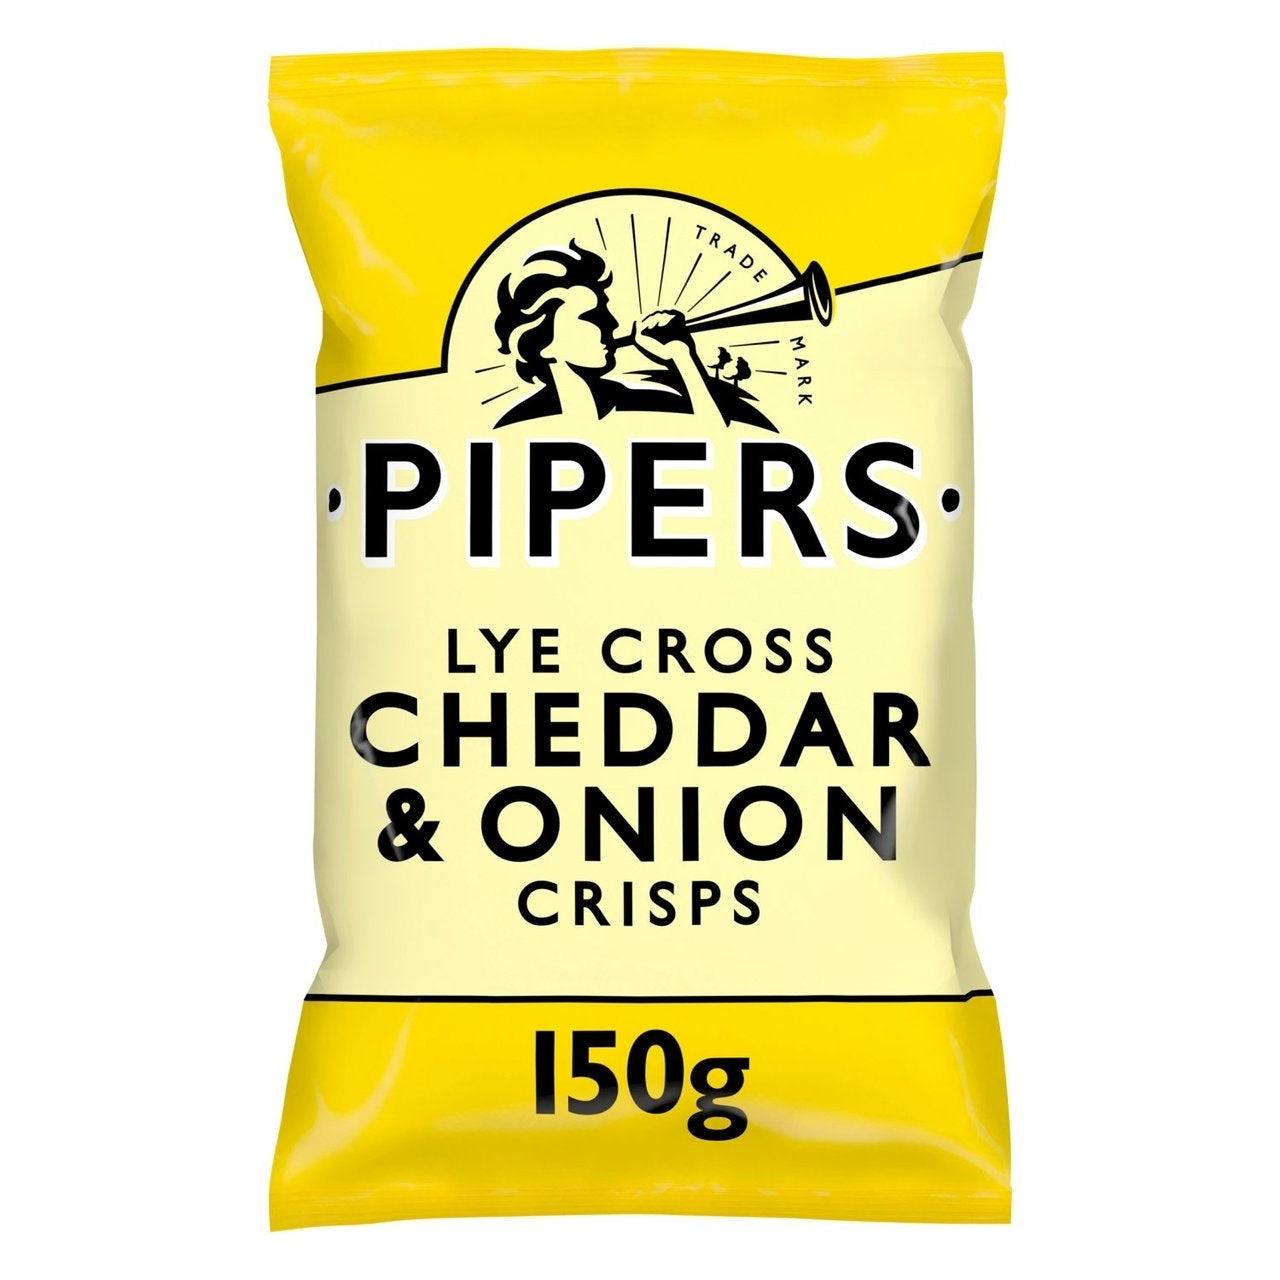 PIPERS LYE CROSS CHEDDAR CHEESE 150G X 15